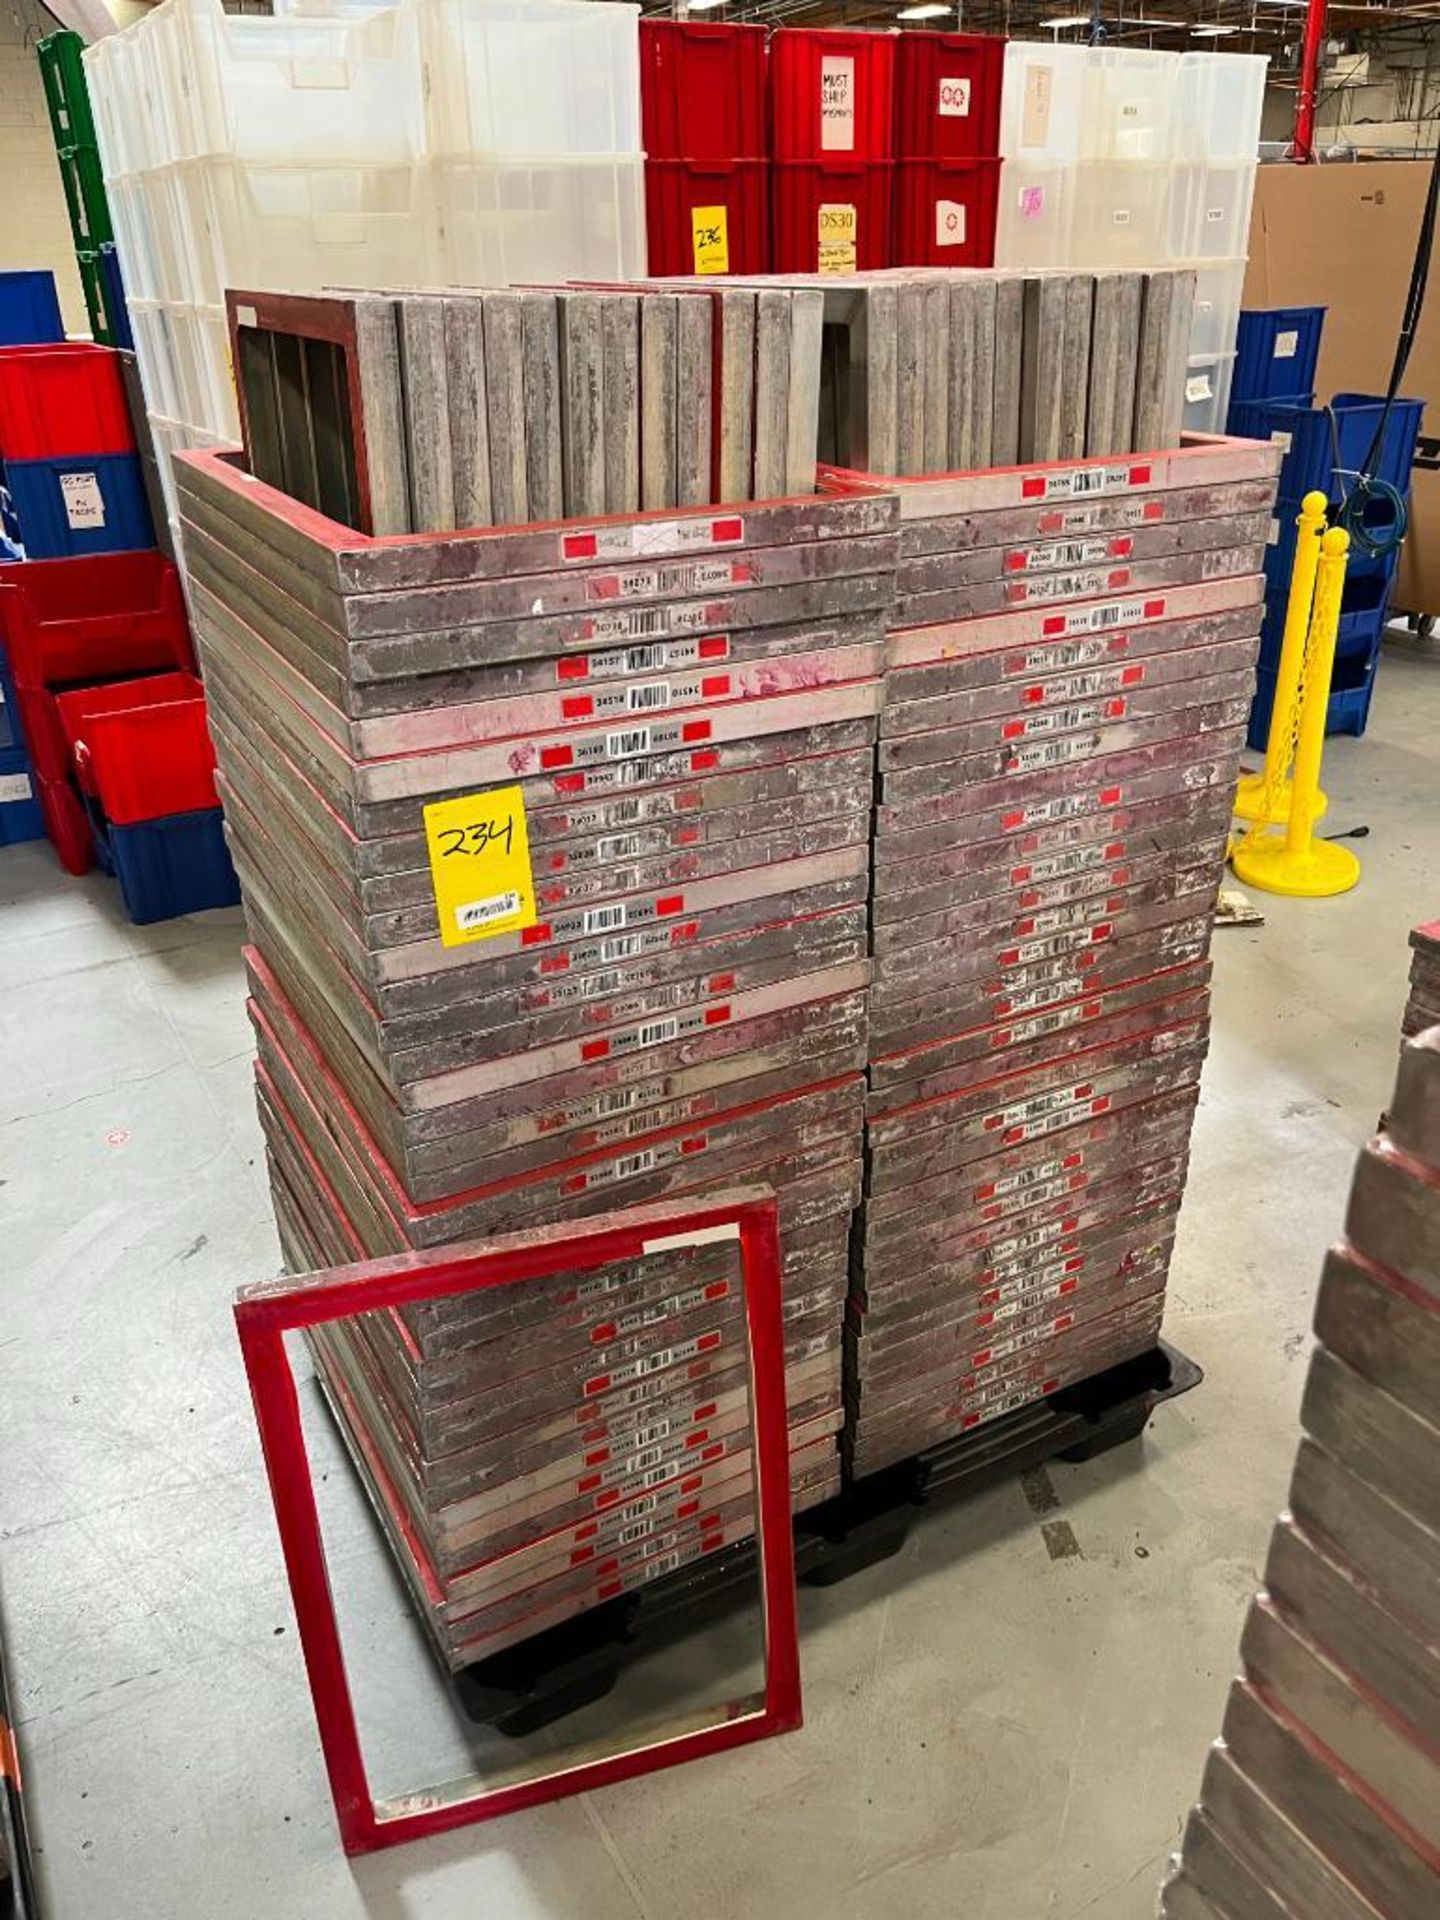 (2) Pallets of Printing Frames (No Mesh), 23" x 31" (About 150 Frames)